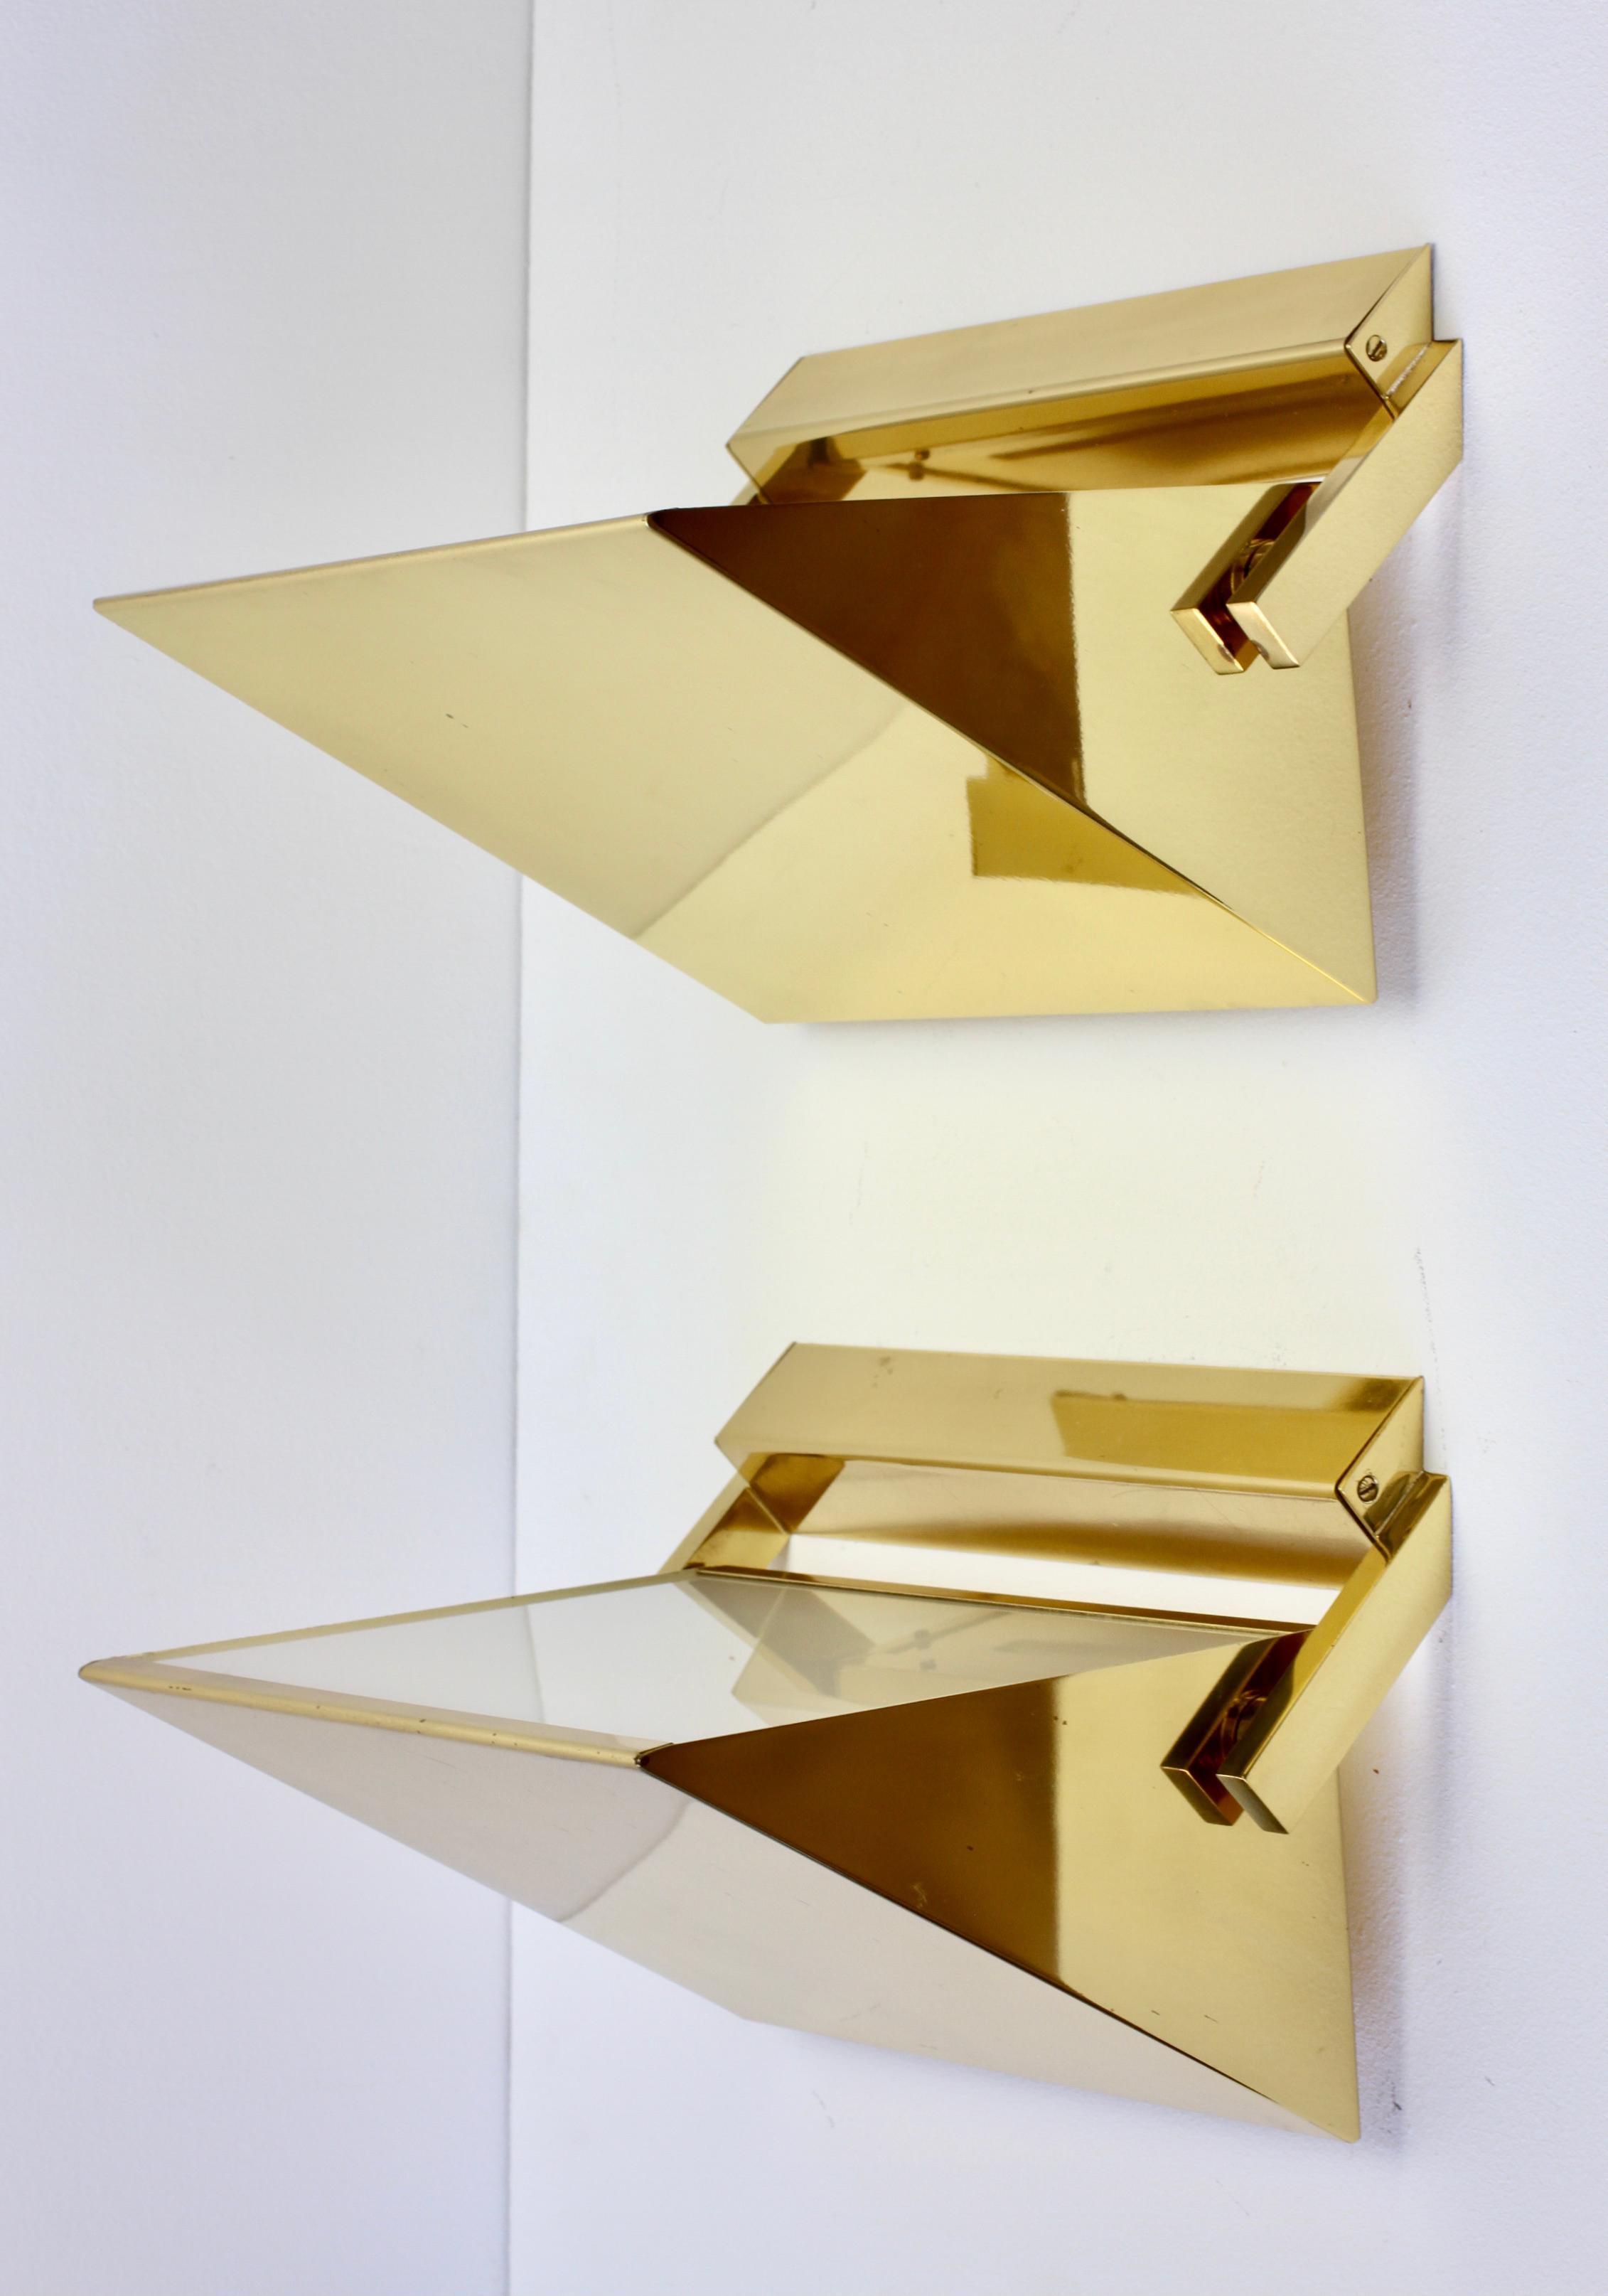 Stunning pair of modernist / cubist adjustable vintage midcentury wall mounted lights, lamps or sconces in polished brass with white opaque acrylic / perspex shades designed by Florian Schulz (attributed) for the Vereinigten Werkstätten München